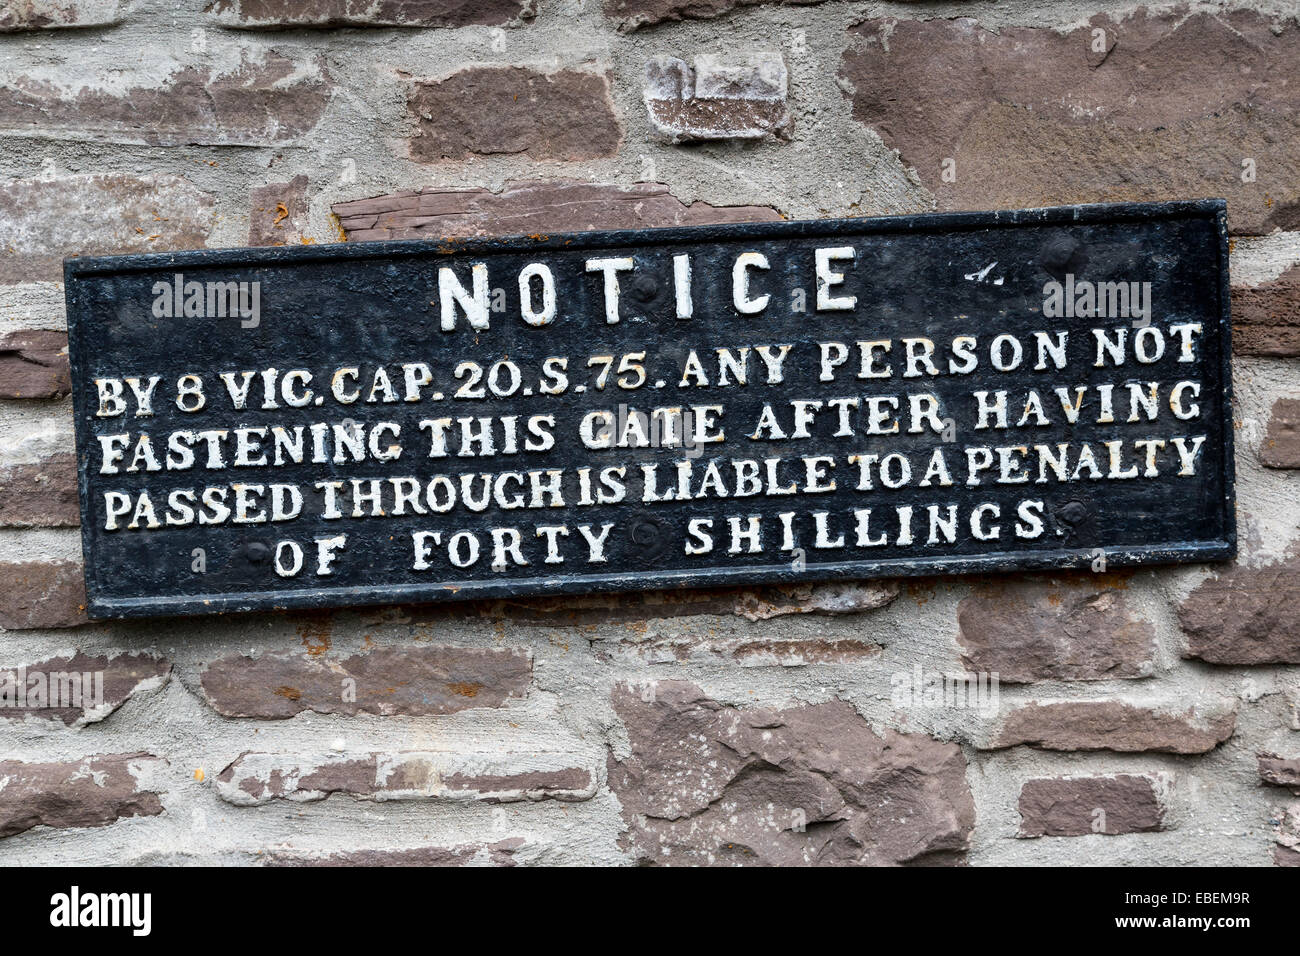 Old notice in cast iron warning of fine if gate left open, Wales, UK Stock Photo